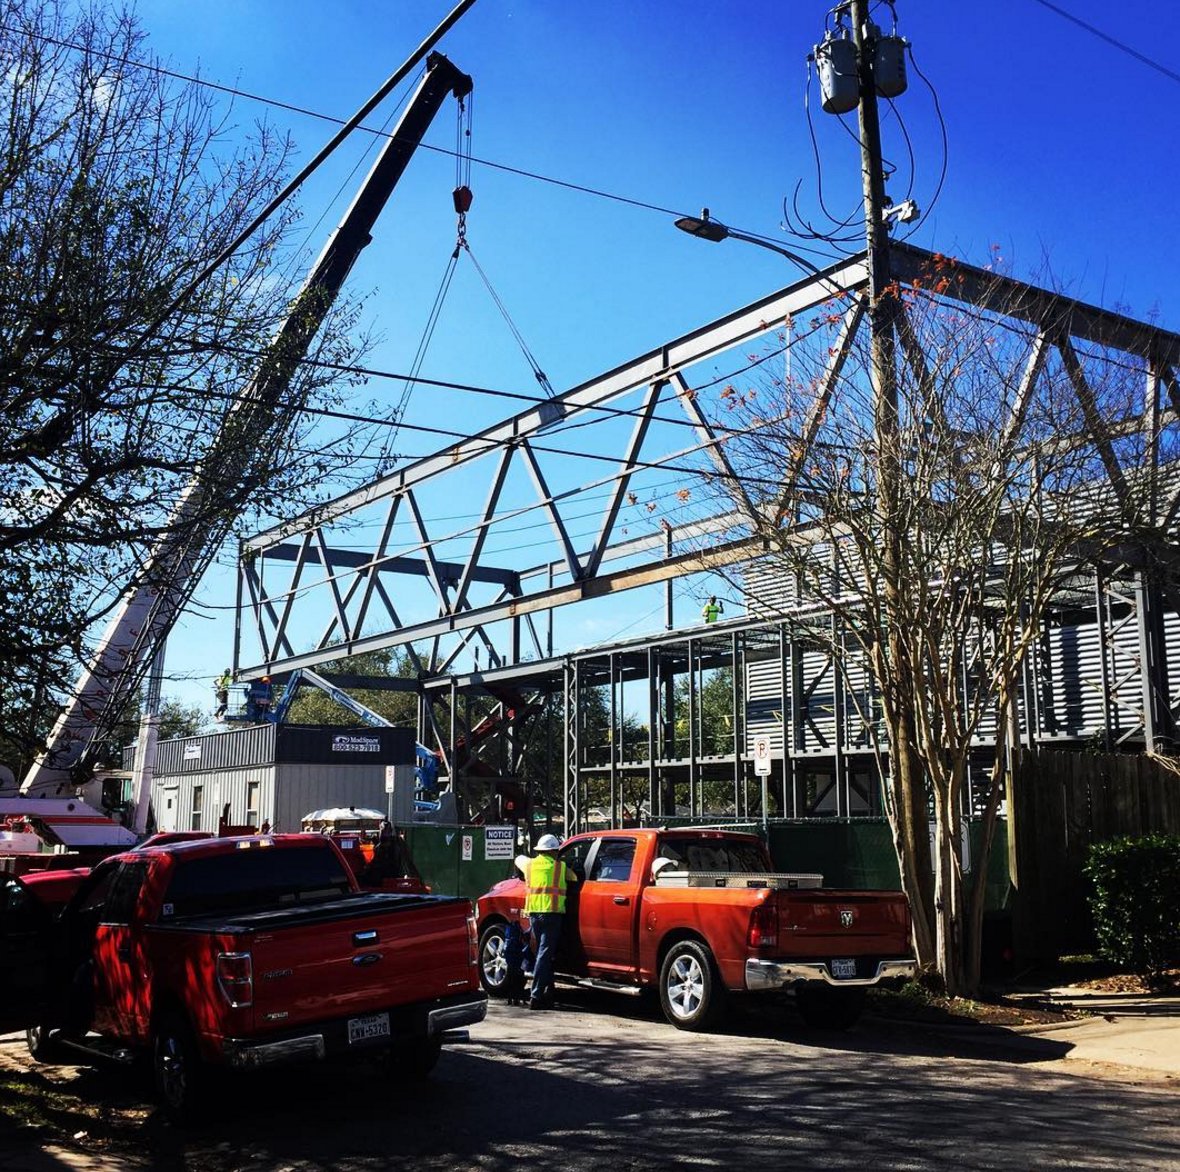 Truss rising. Onsite at our new office! #dkarc #texasarchitecture #steel #structure #contractor #constructionlife